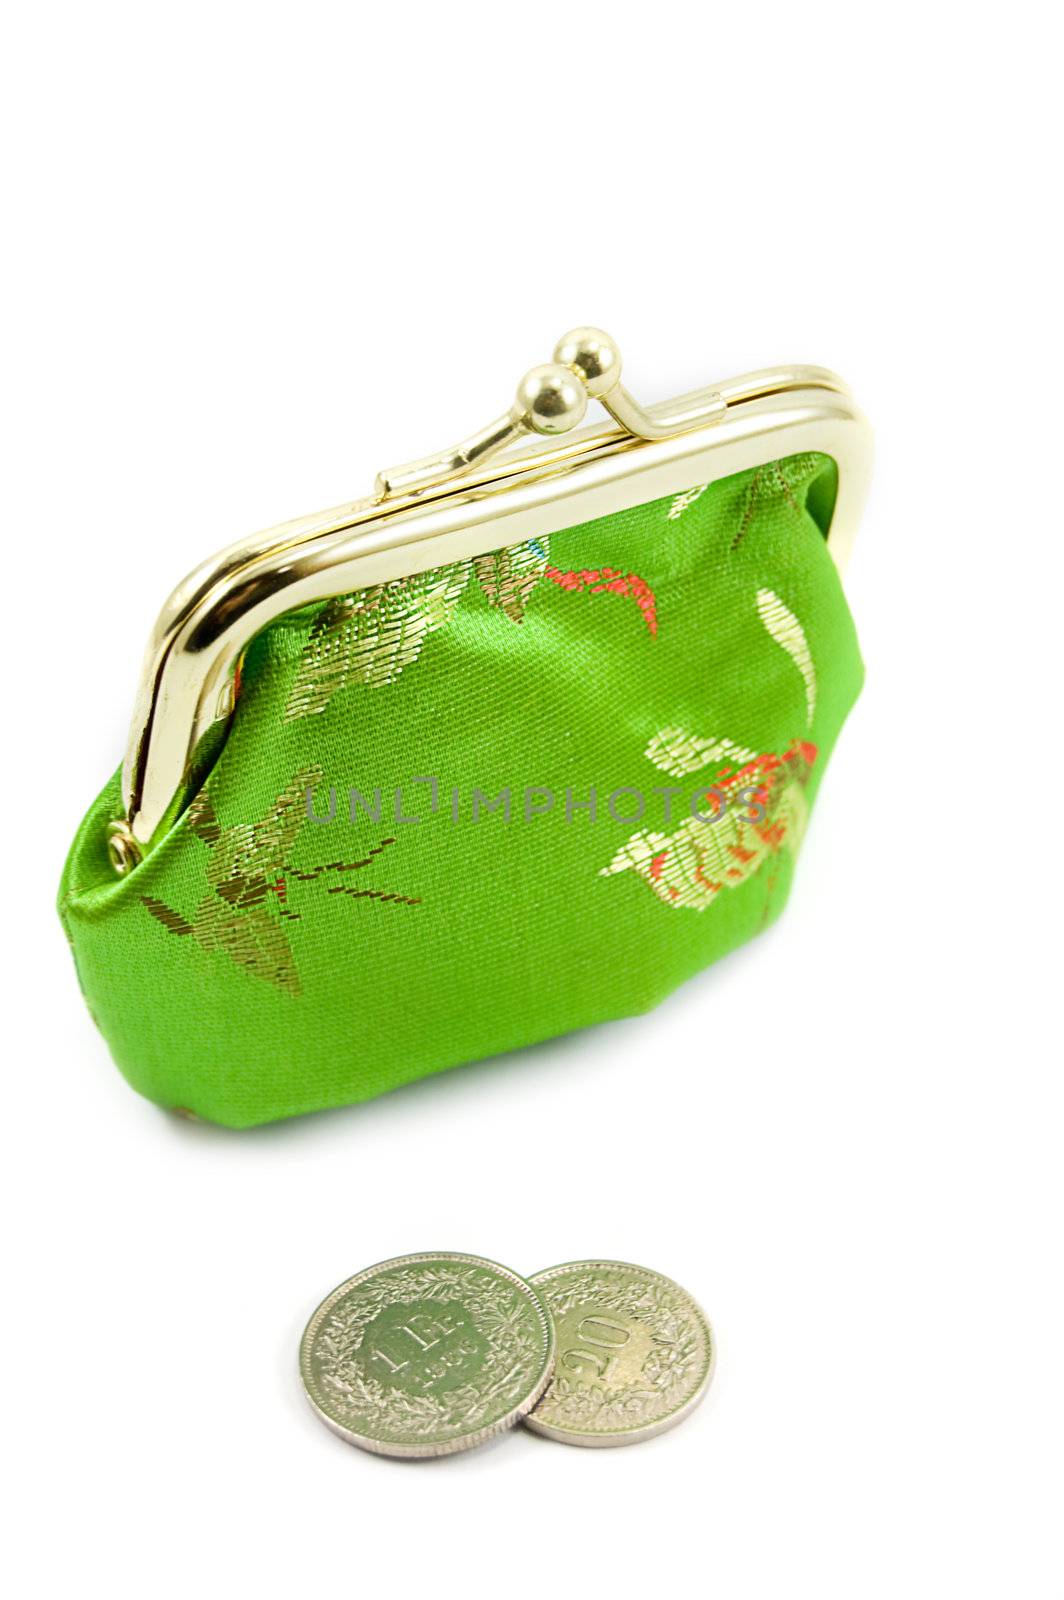 Green purse with some coins in front of it